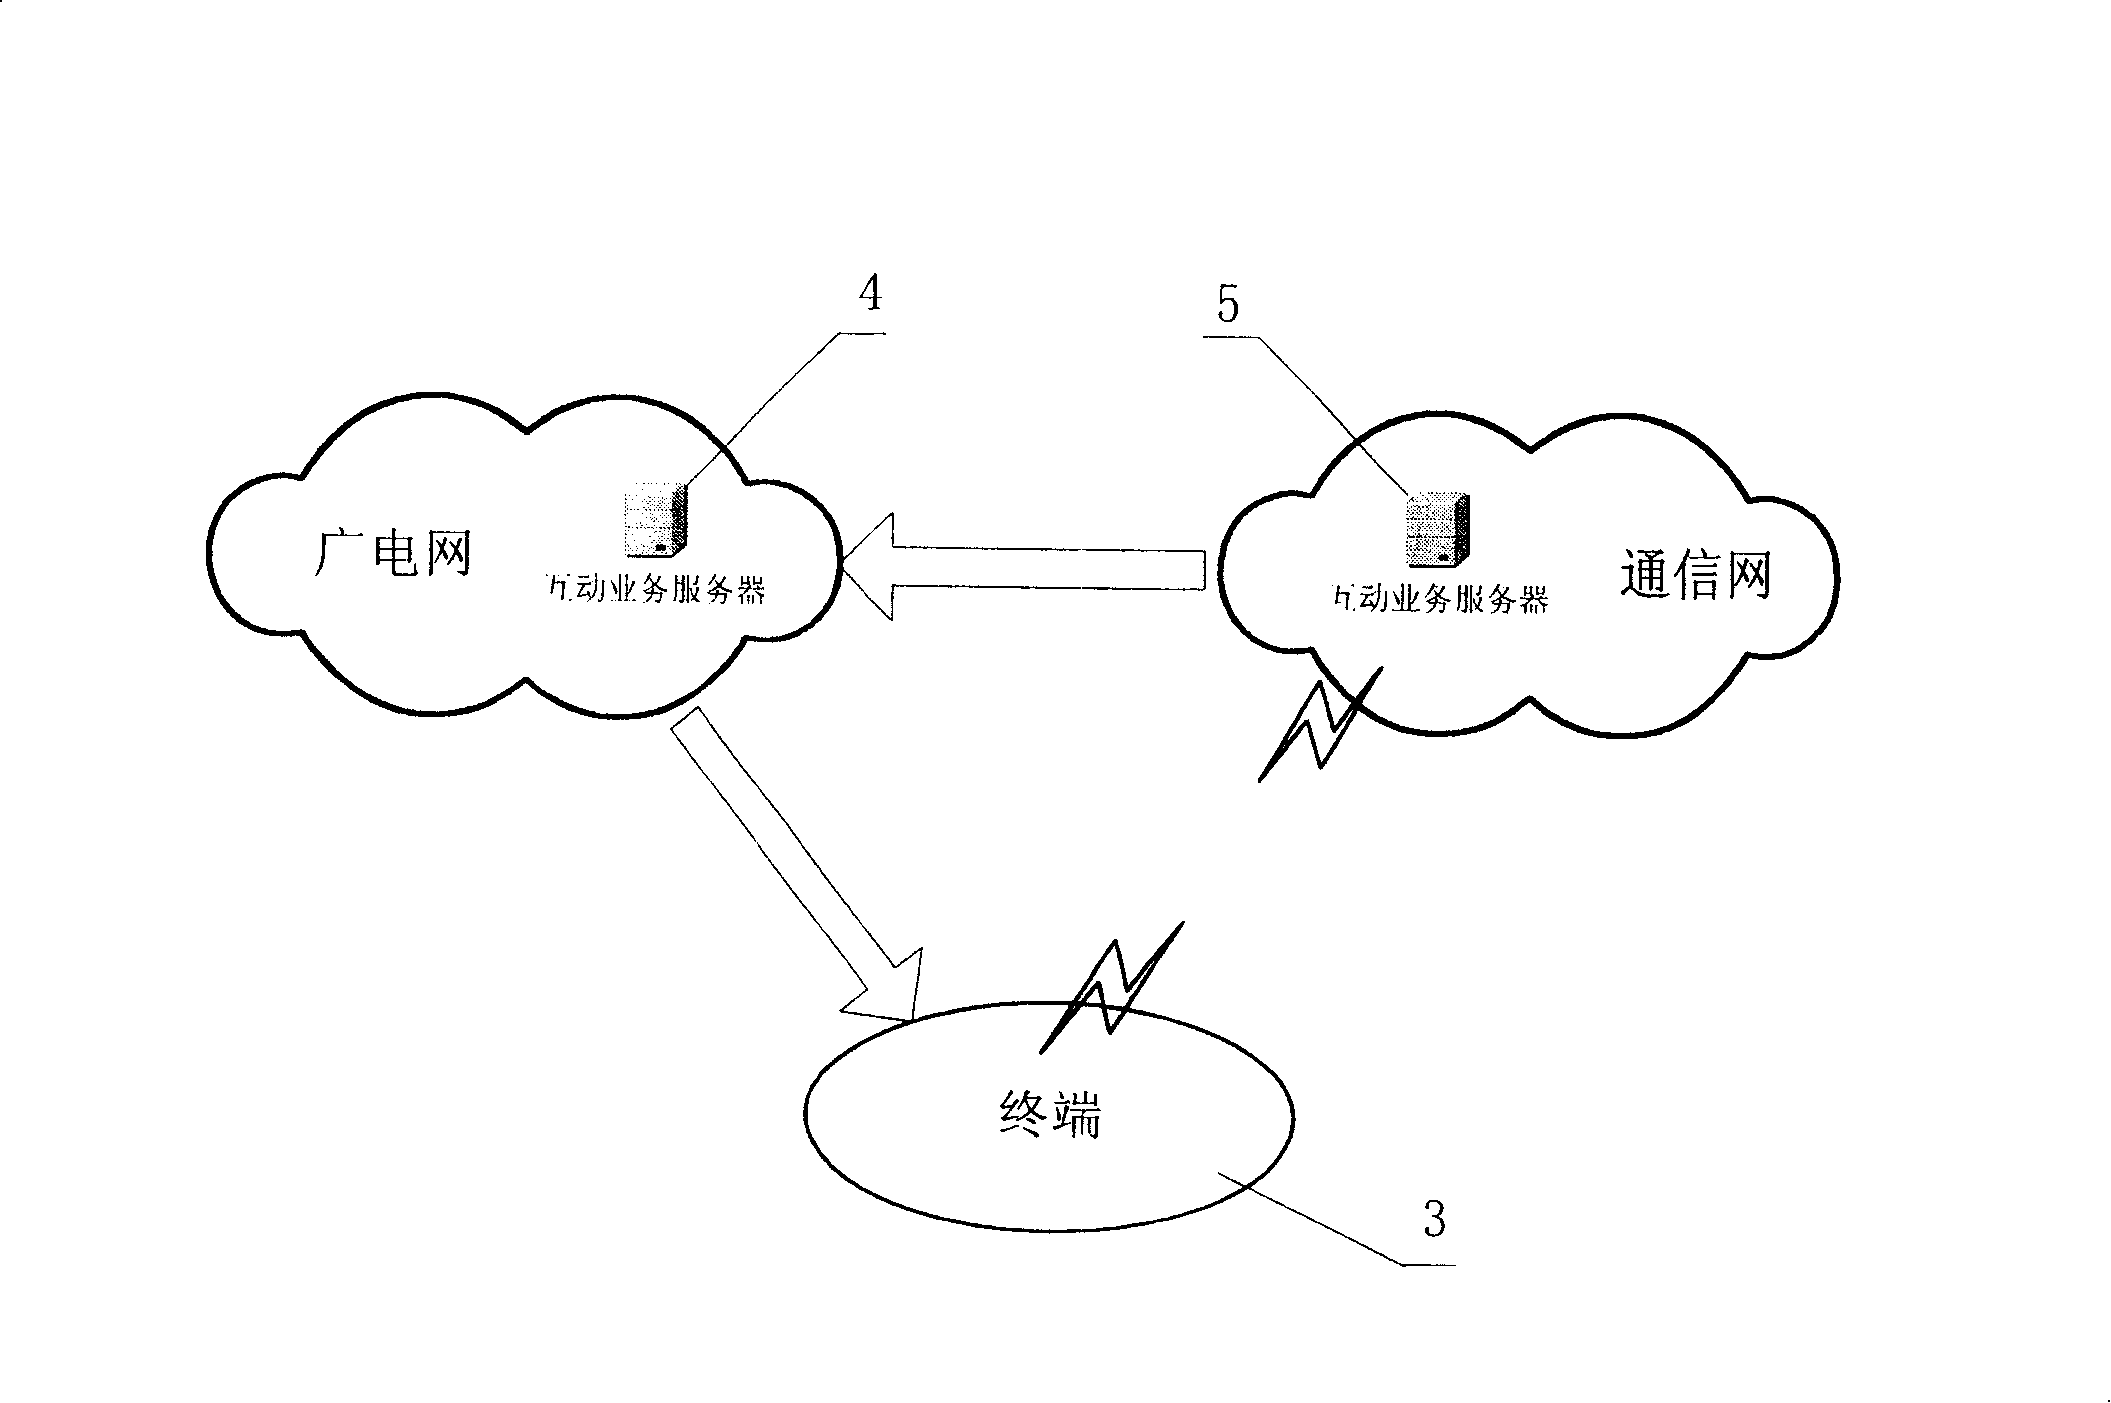 Interactive service terminal, realization system and method